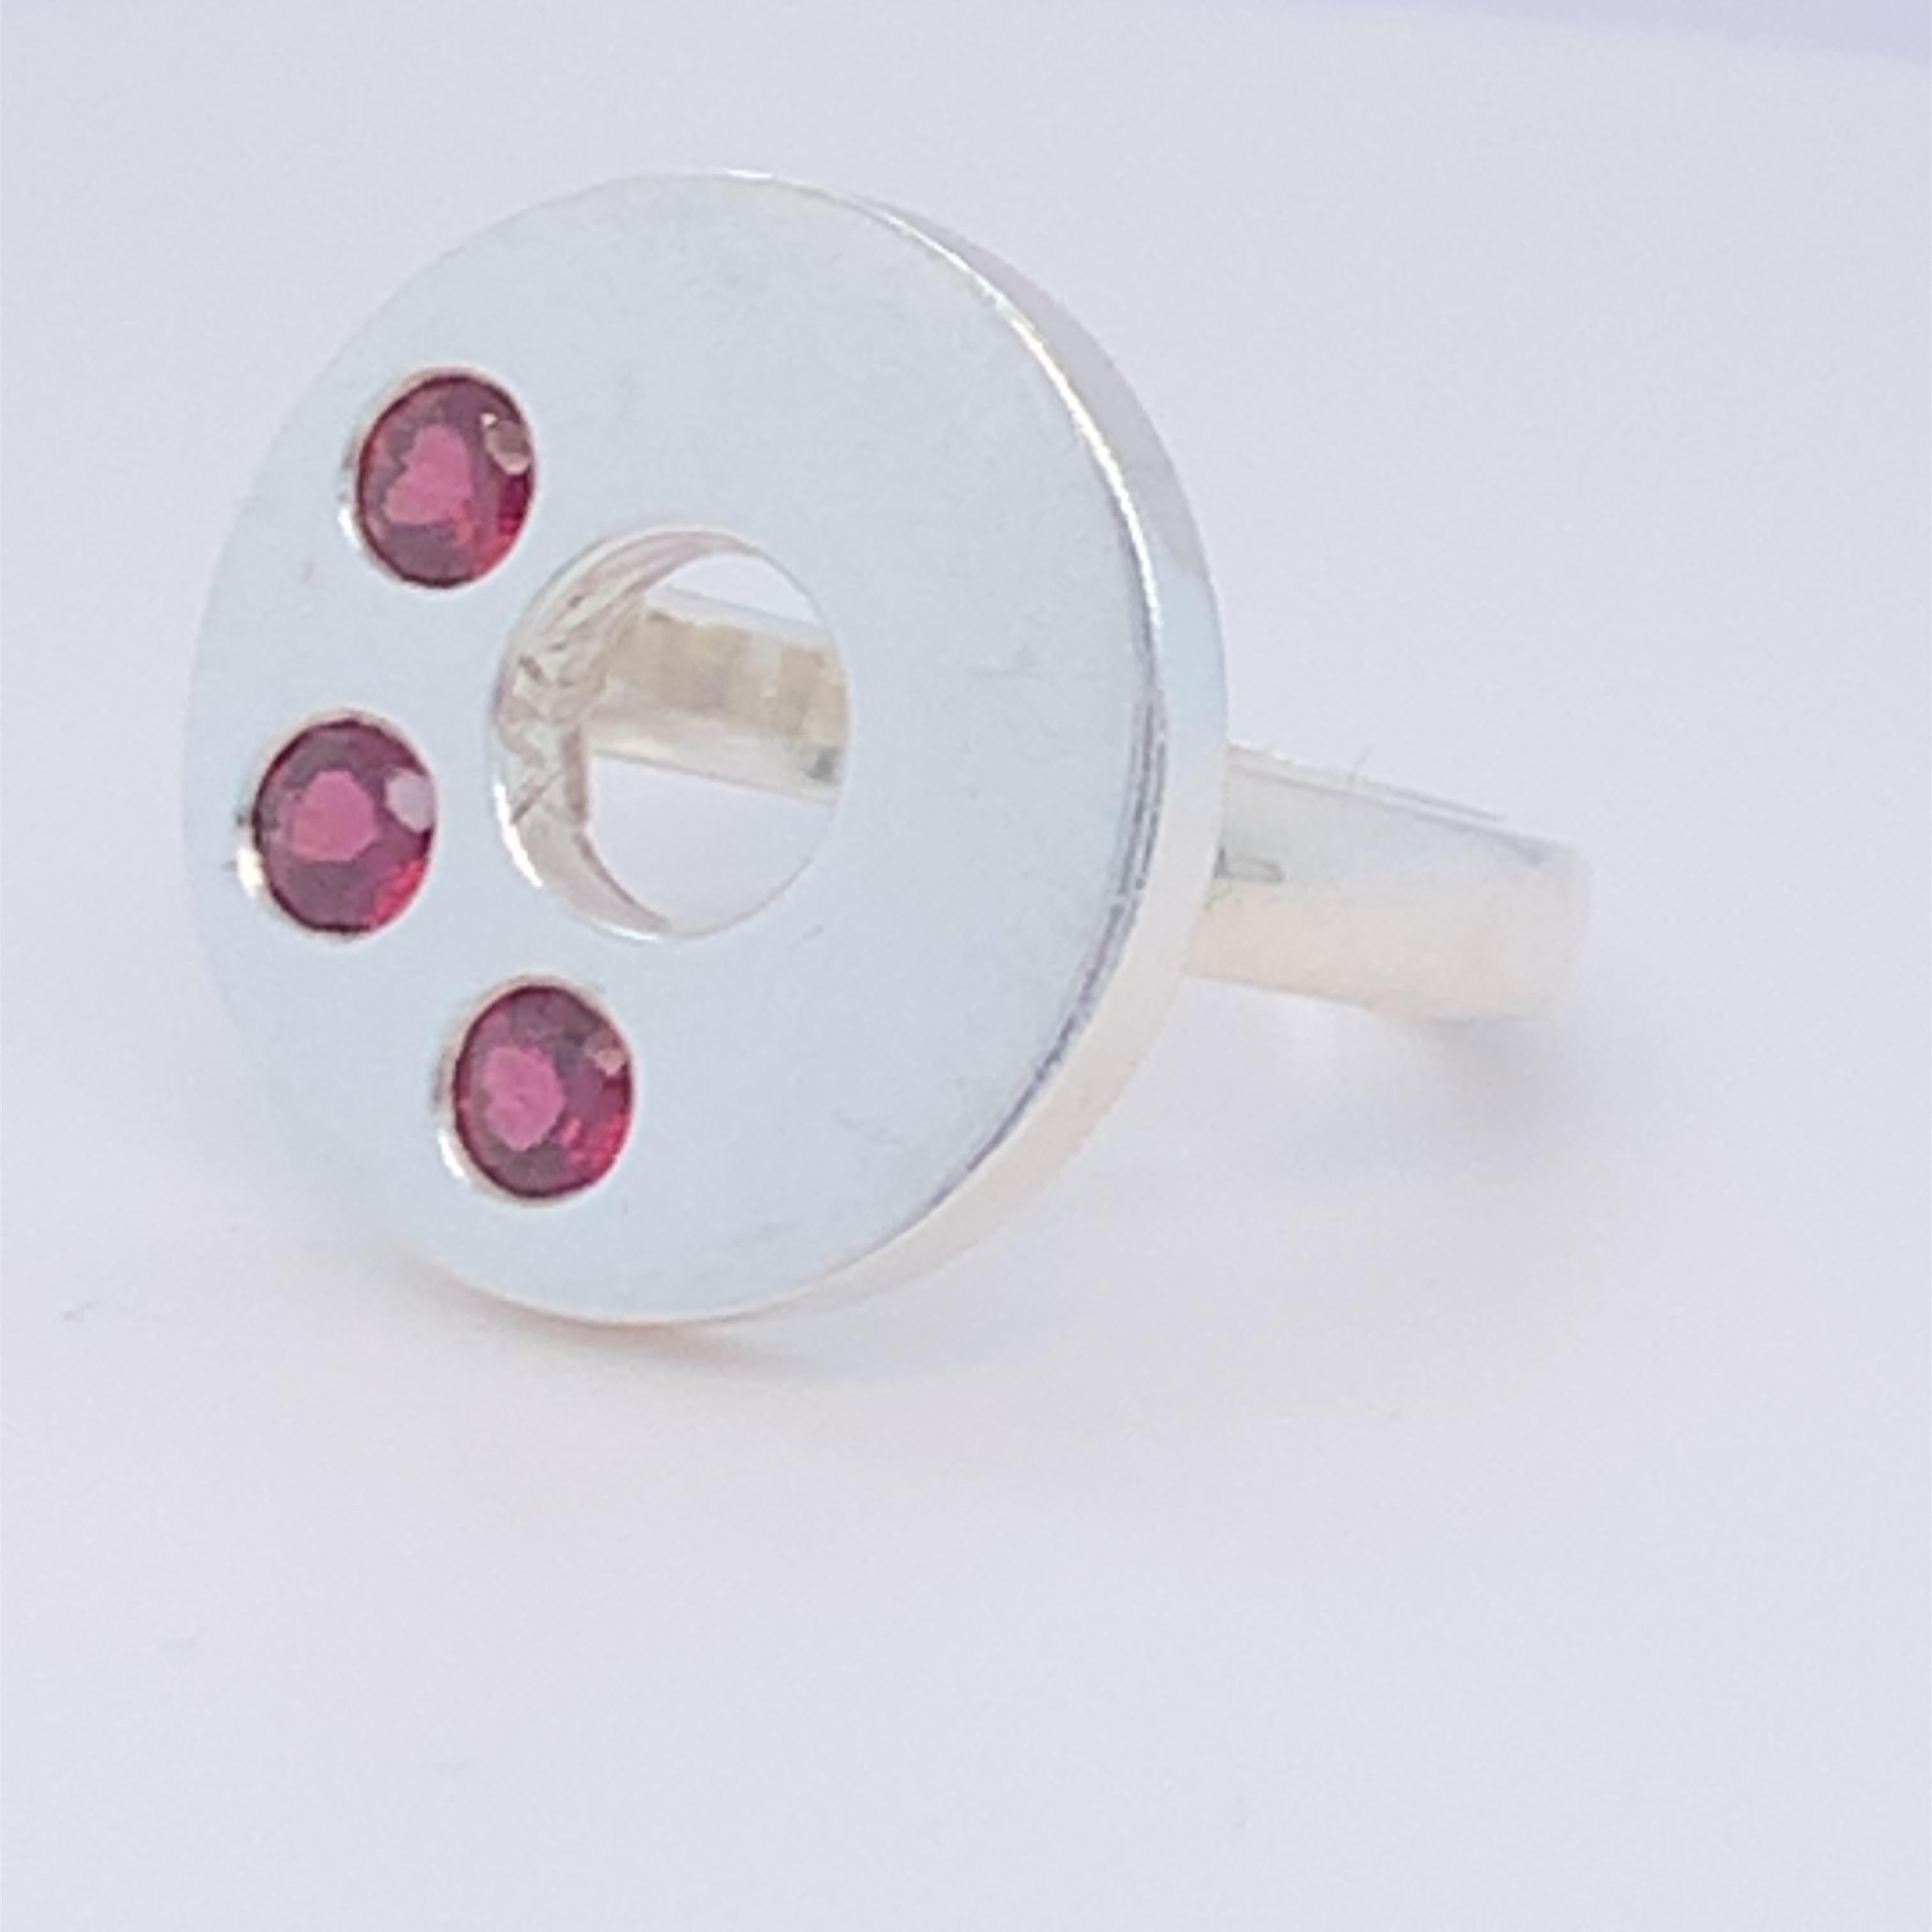 This magnificent disc design ring boasts three round garnets. Birth stone of the month of January. This elegant and stunning piece is suitable for day wear. Set in sterling silver and hand made by master craftsman.

Garnet: 0.50ct